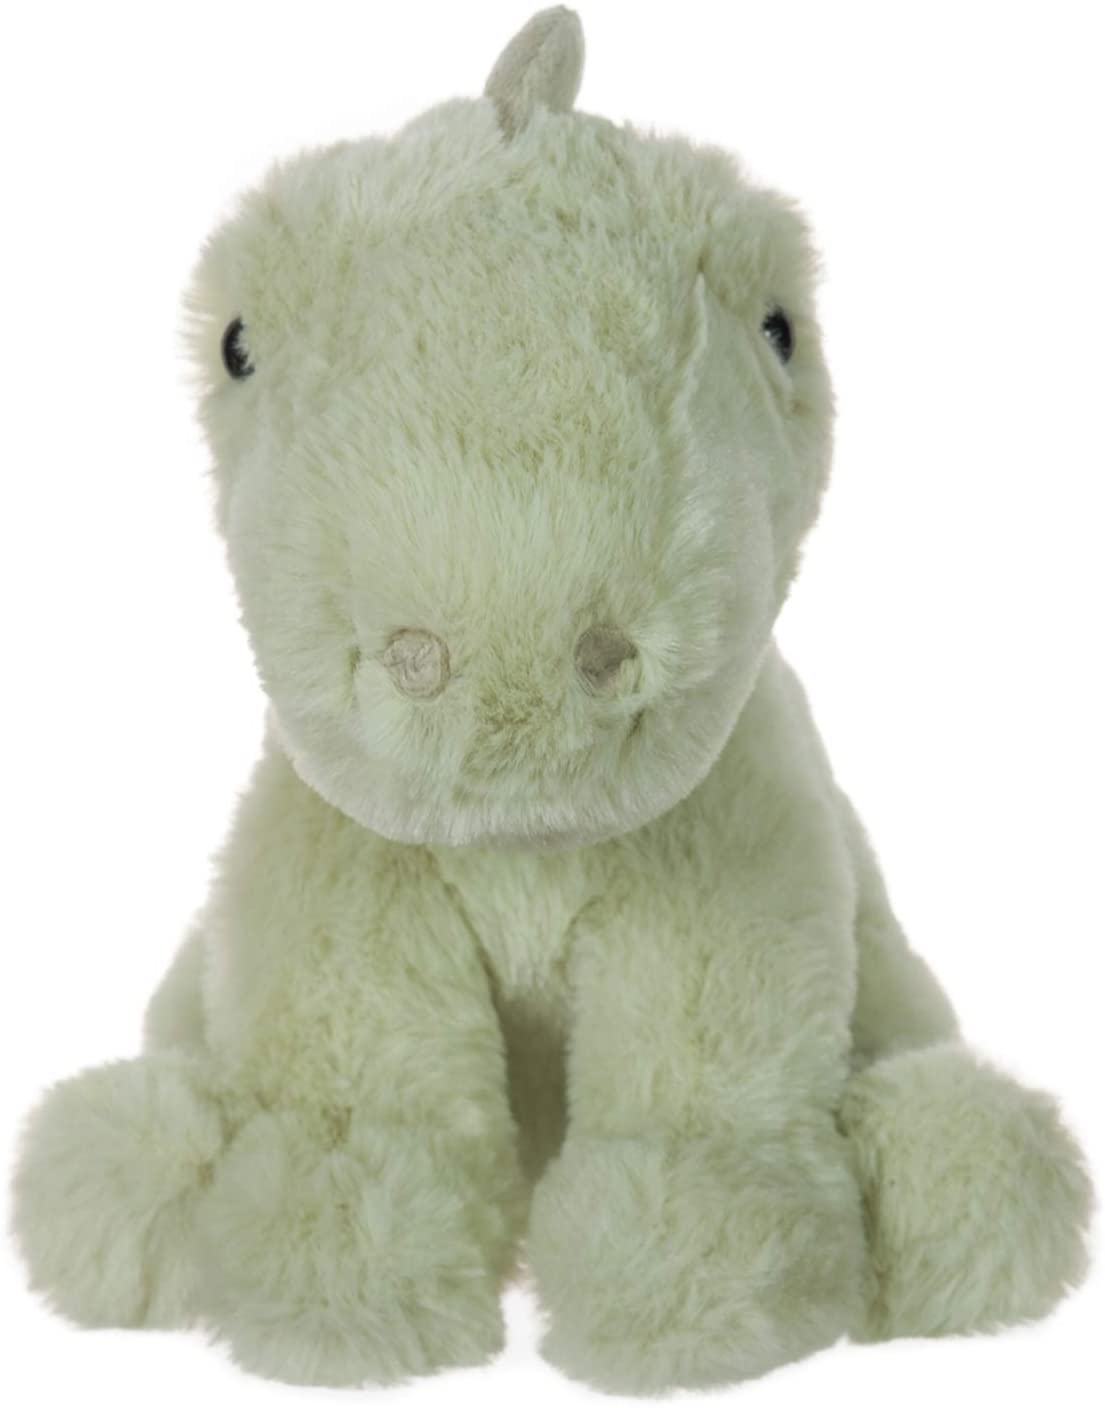 Apricot Lamb Toys Plush Green Dinosaur Stuffed Animal Soft Cuddly Perfect  for Child (Green Dino,8 Inches)